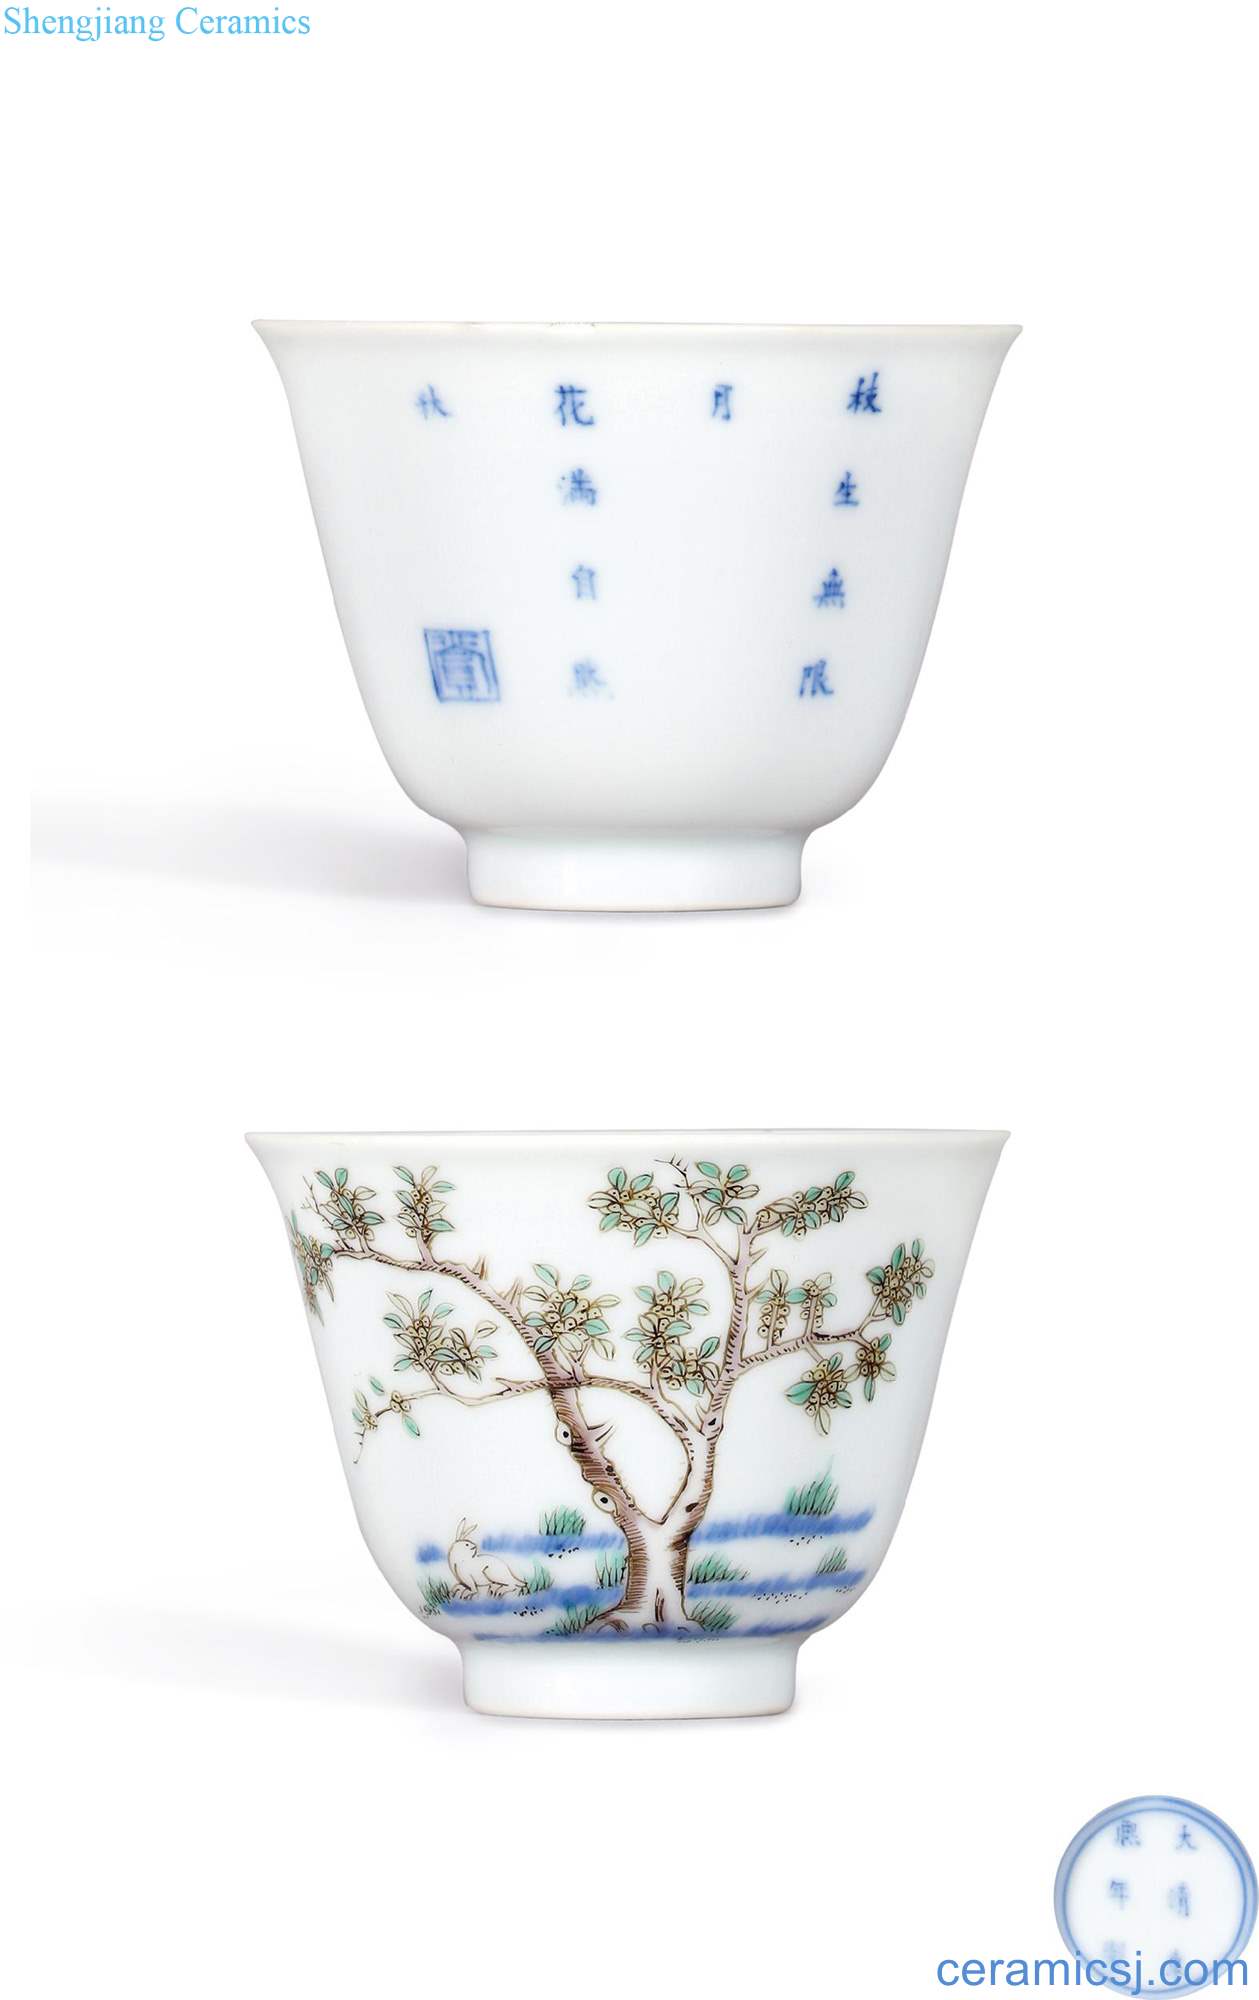 The qing emperor kangxi "August osmanthus" god of cup